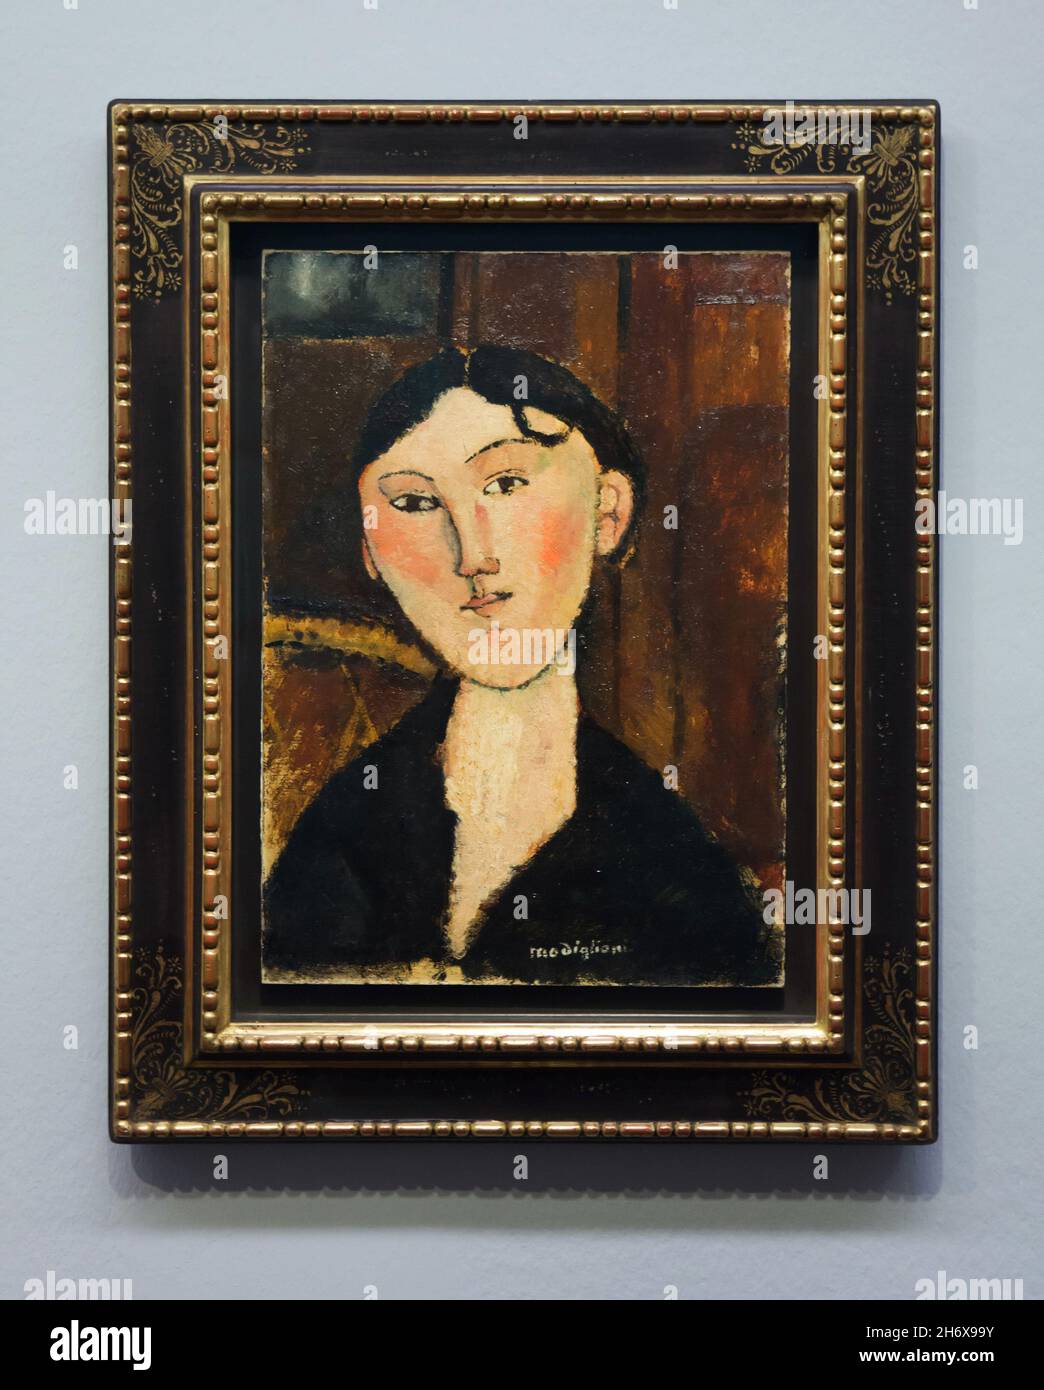 Painting 'Beatrice Hastings' by Italian modernist painter Amedeo Modigliani (1915) on display at his retrospective exhibition in the Albertina Museum in Vienna, Austria. The exhibition marking the centenary of artist's death runs till 9 January 2022. Stock Photo